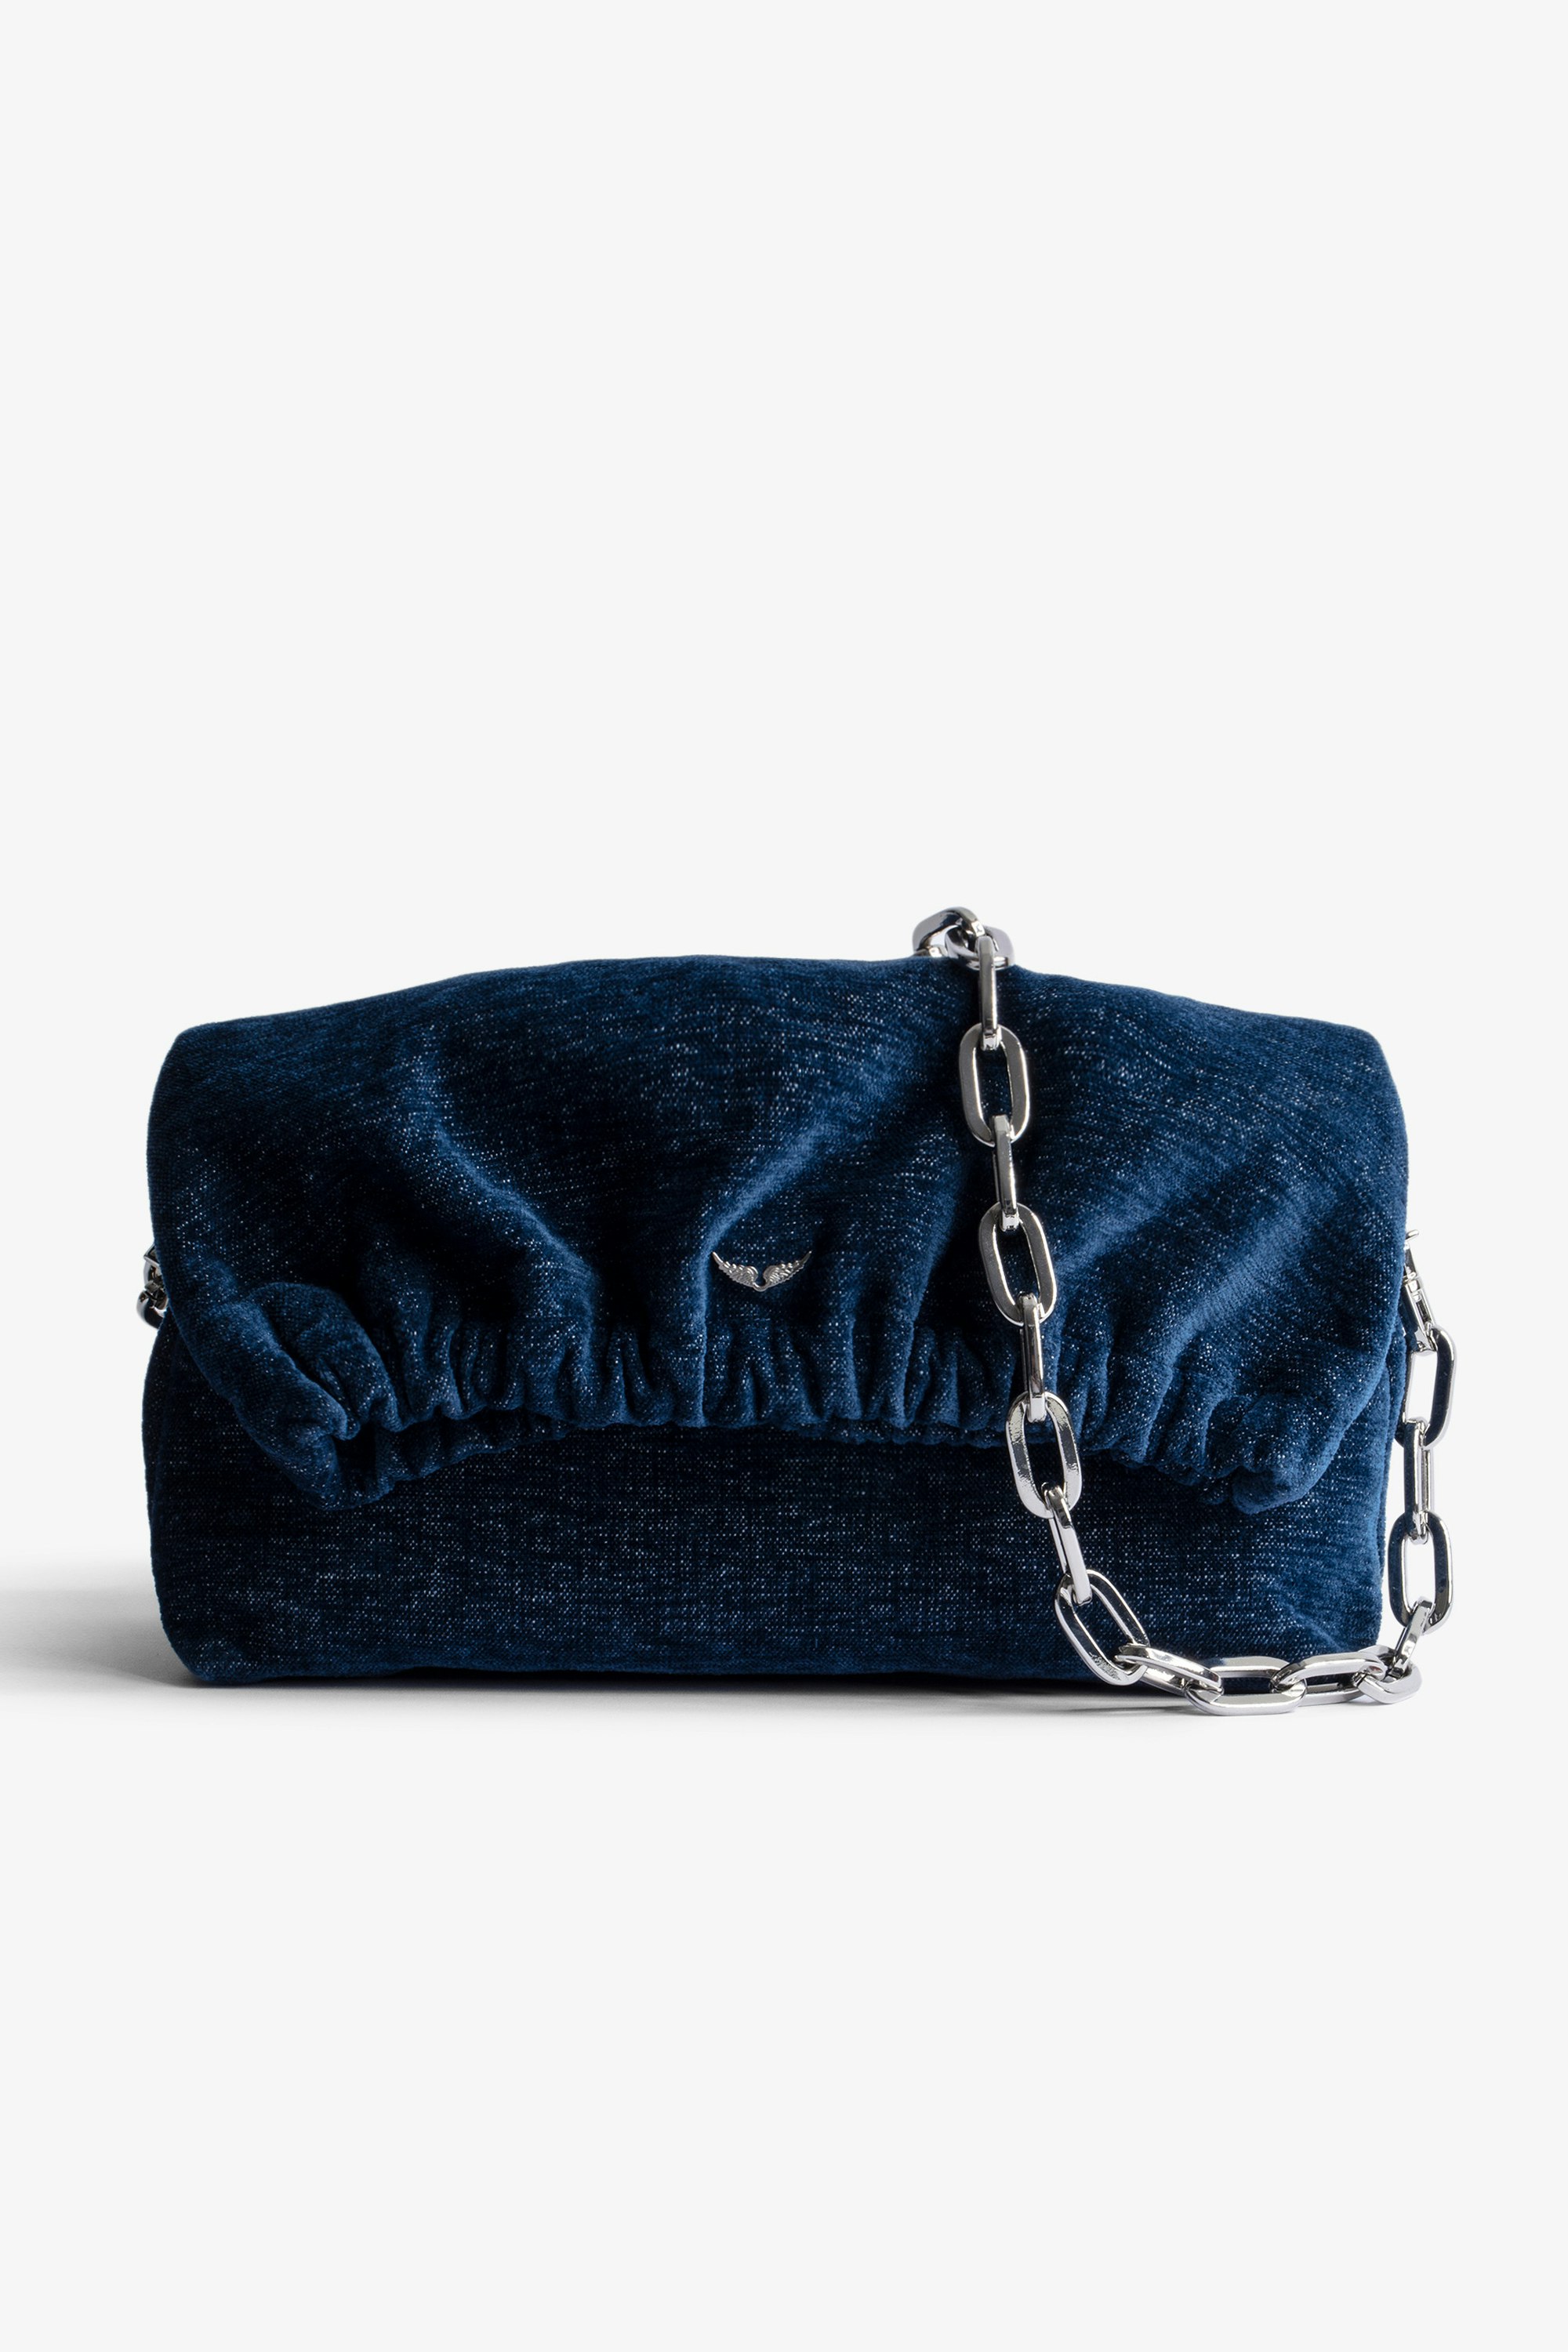 Rockyssime バッグ Women’s clutch bag in blue denim with metal chain